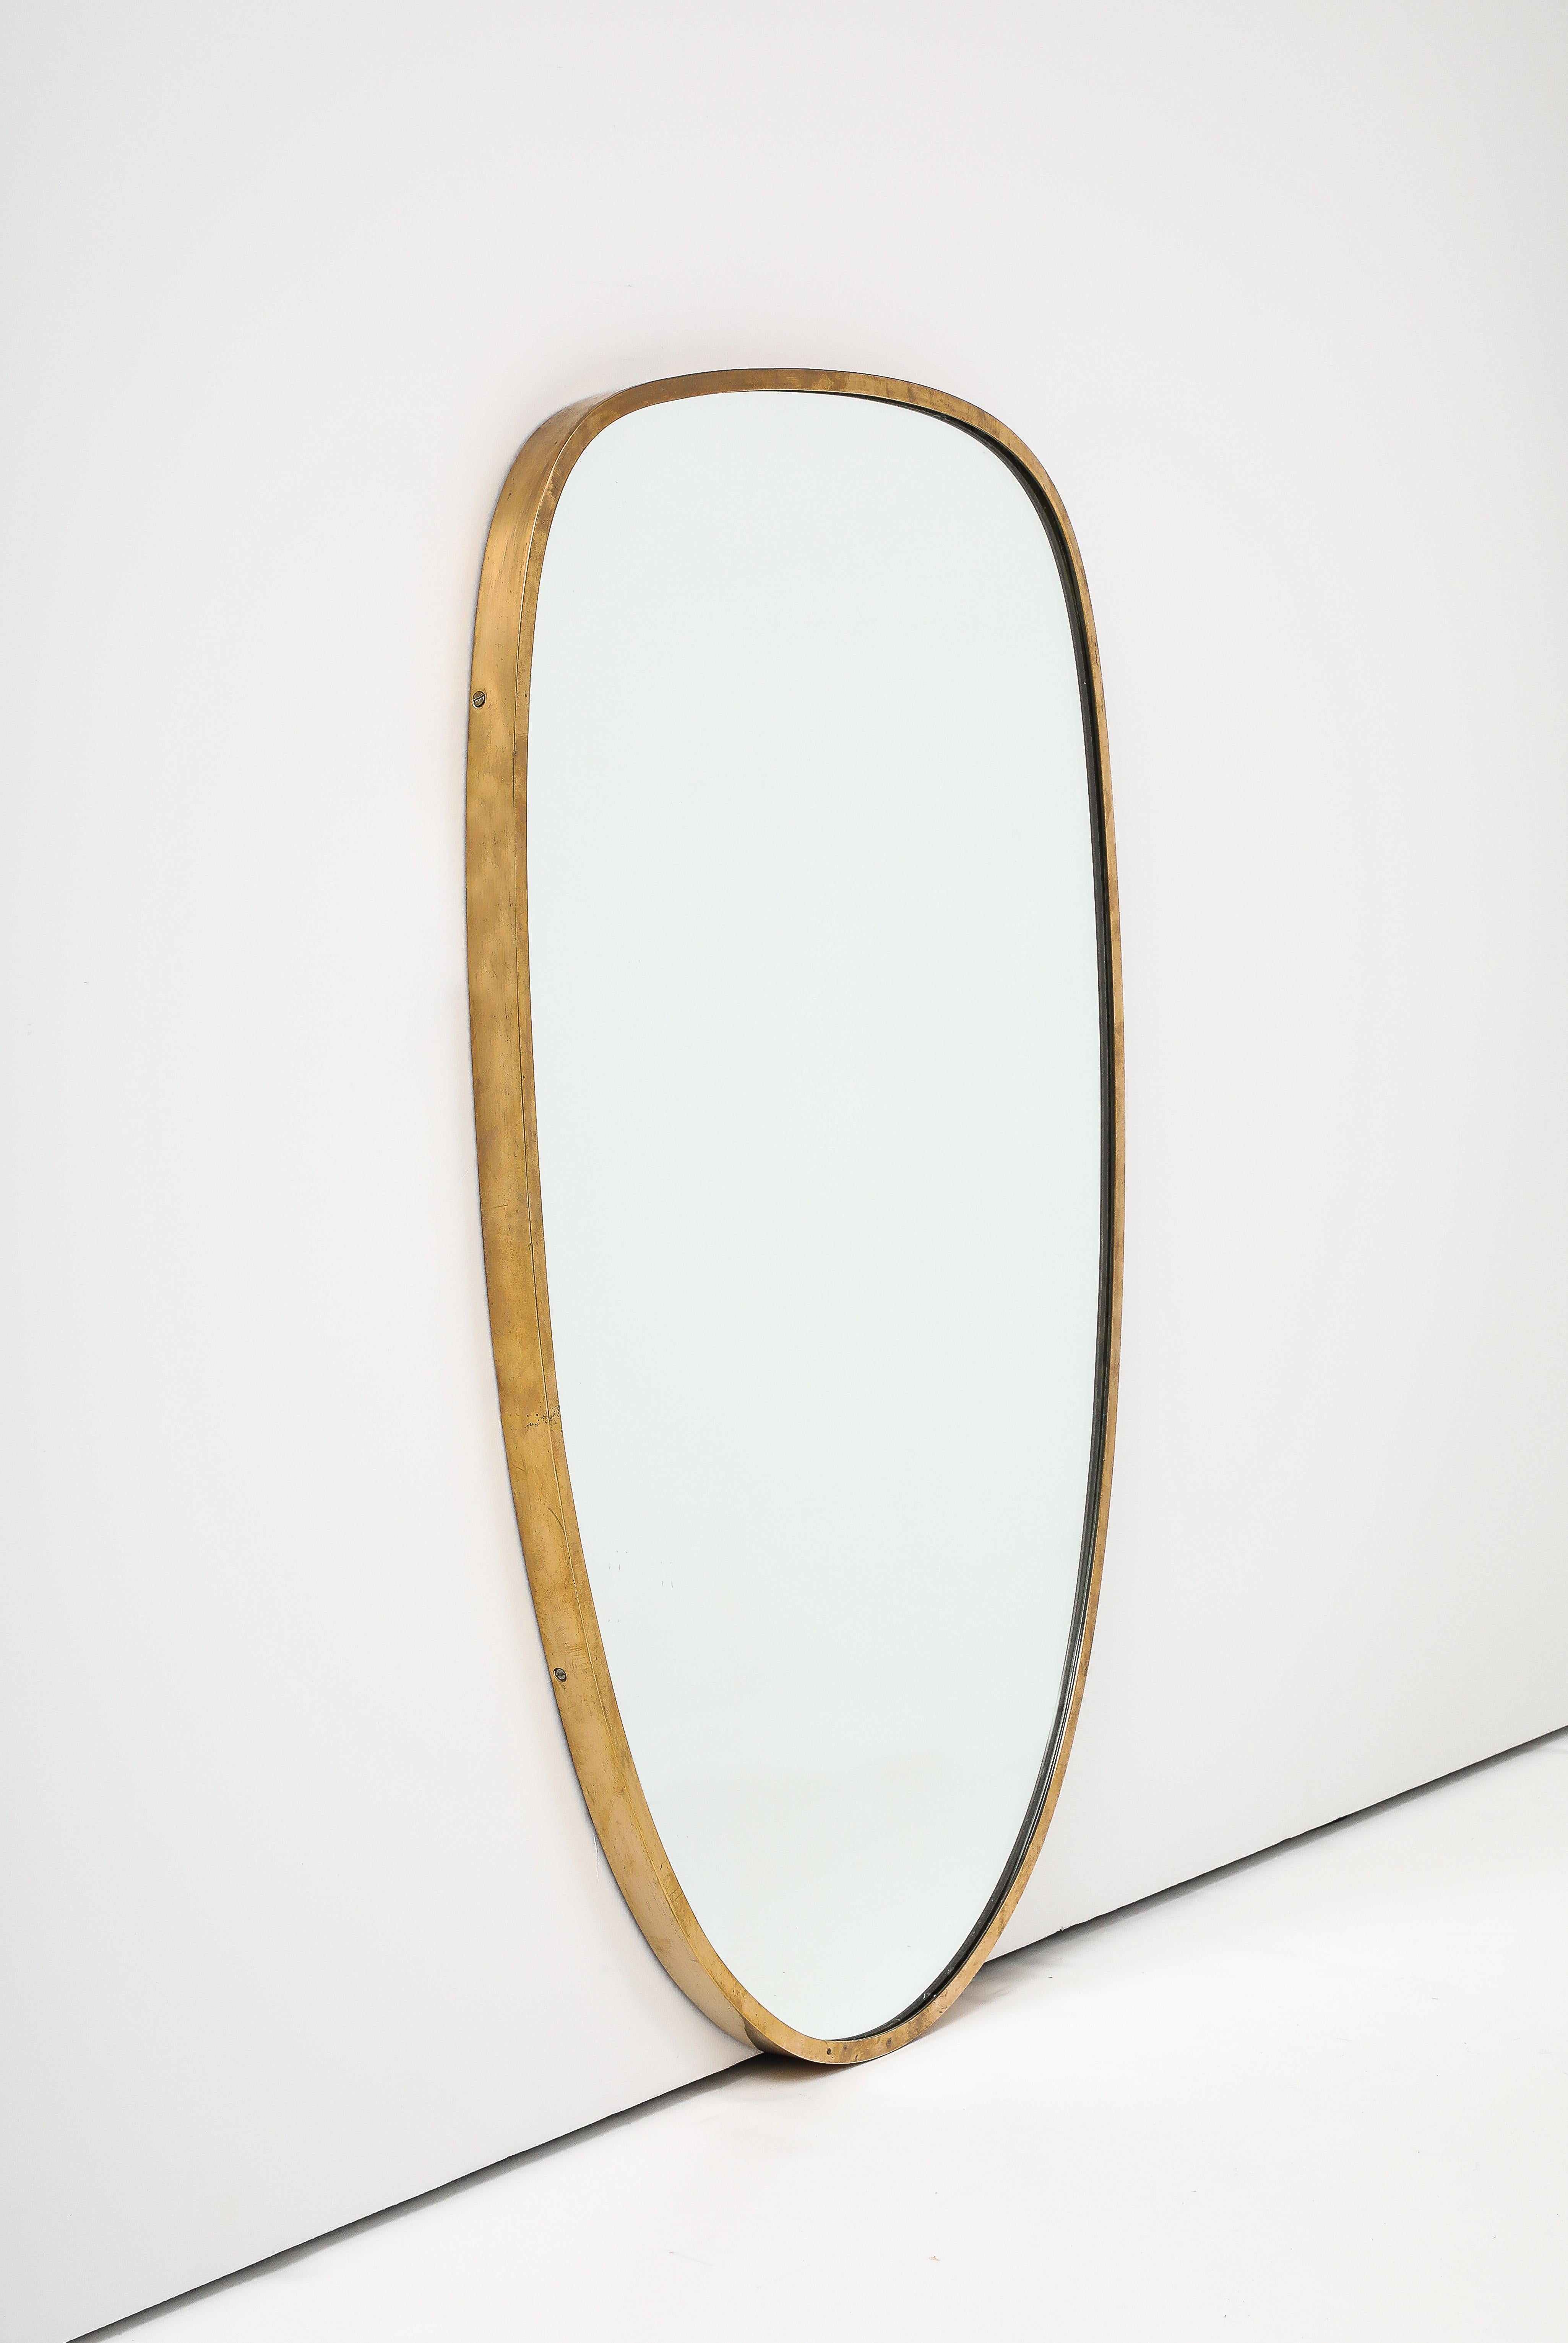 Italian Modernist Mirror with Brass Frame, Italy, c. 1950
Brass, Glass
H: 30 D: 1 W: 19 in.

Unusual shape oft not found